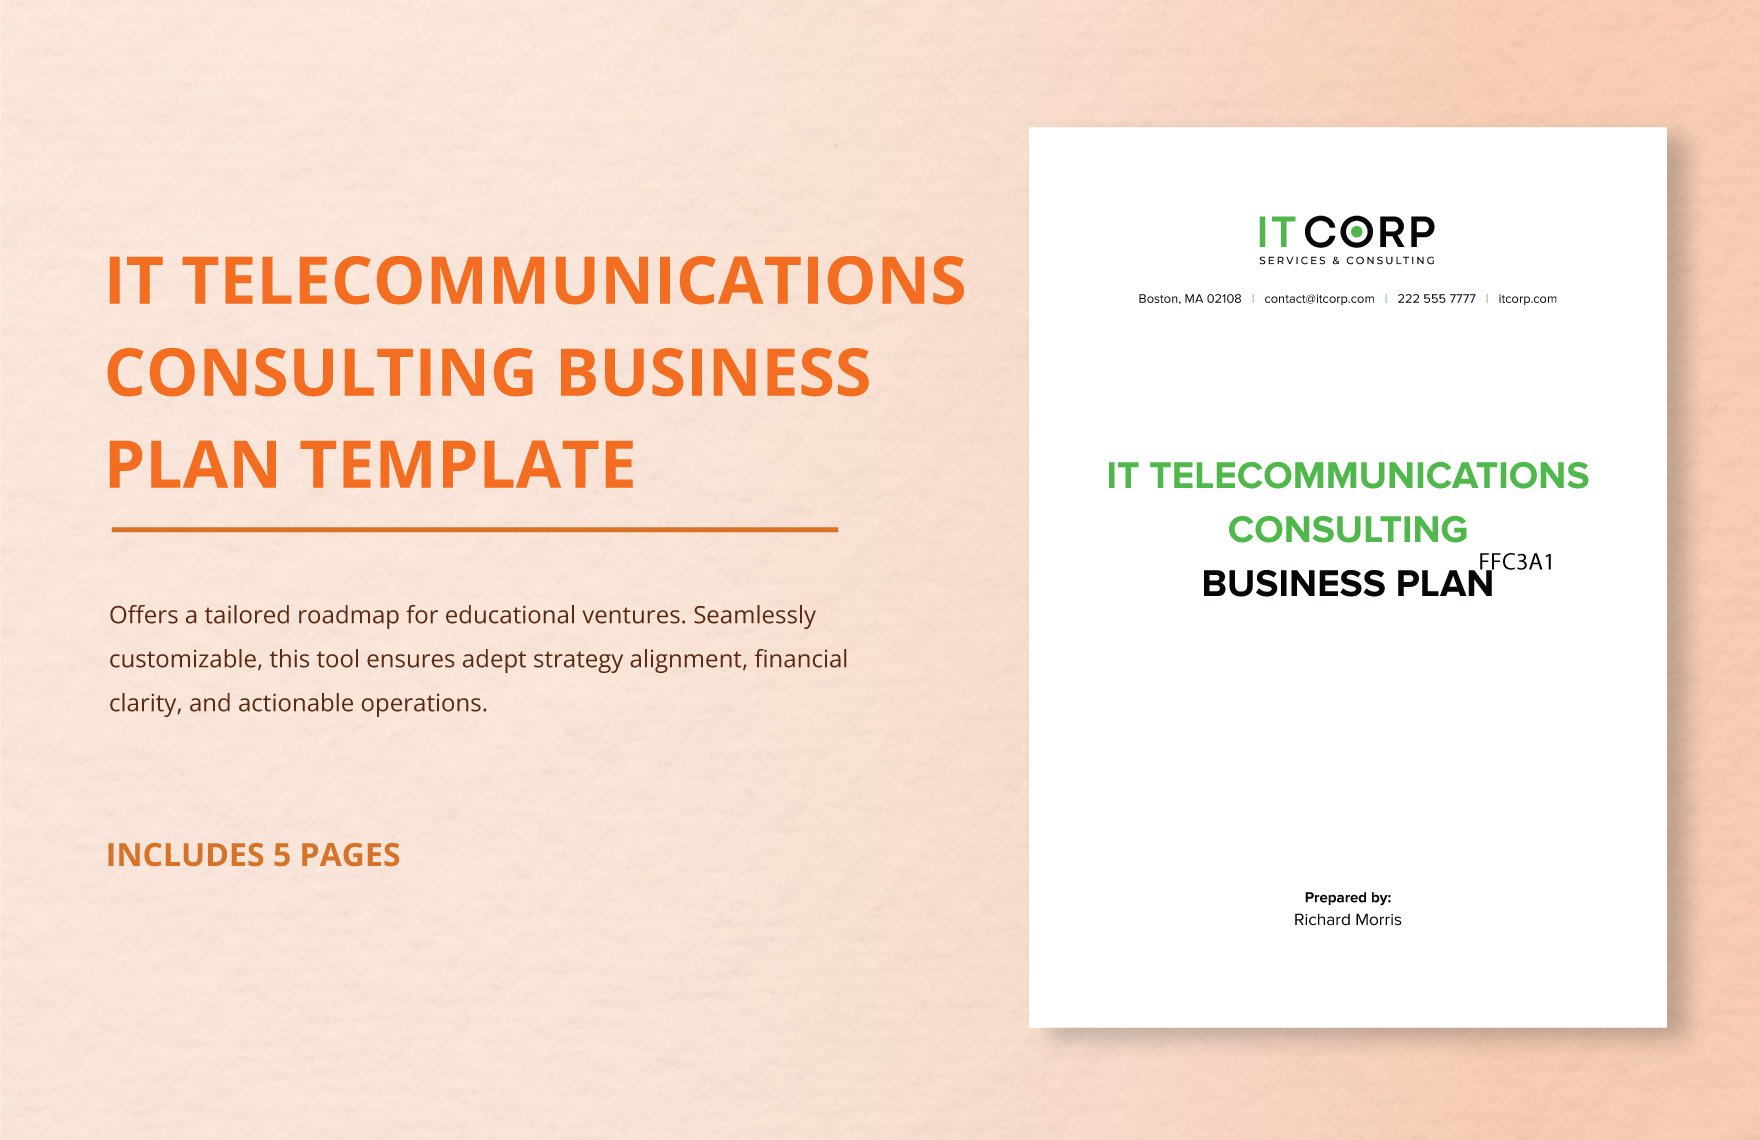 IT Telecommunications Consulting Business Plan Template